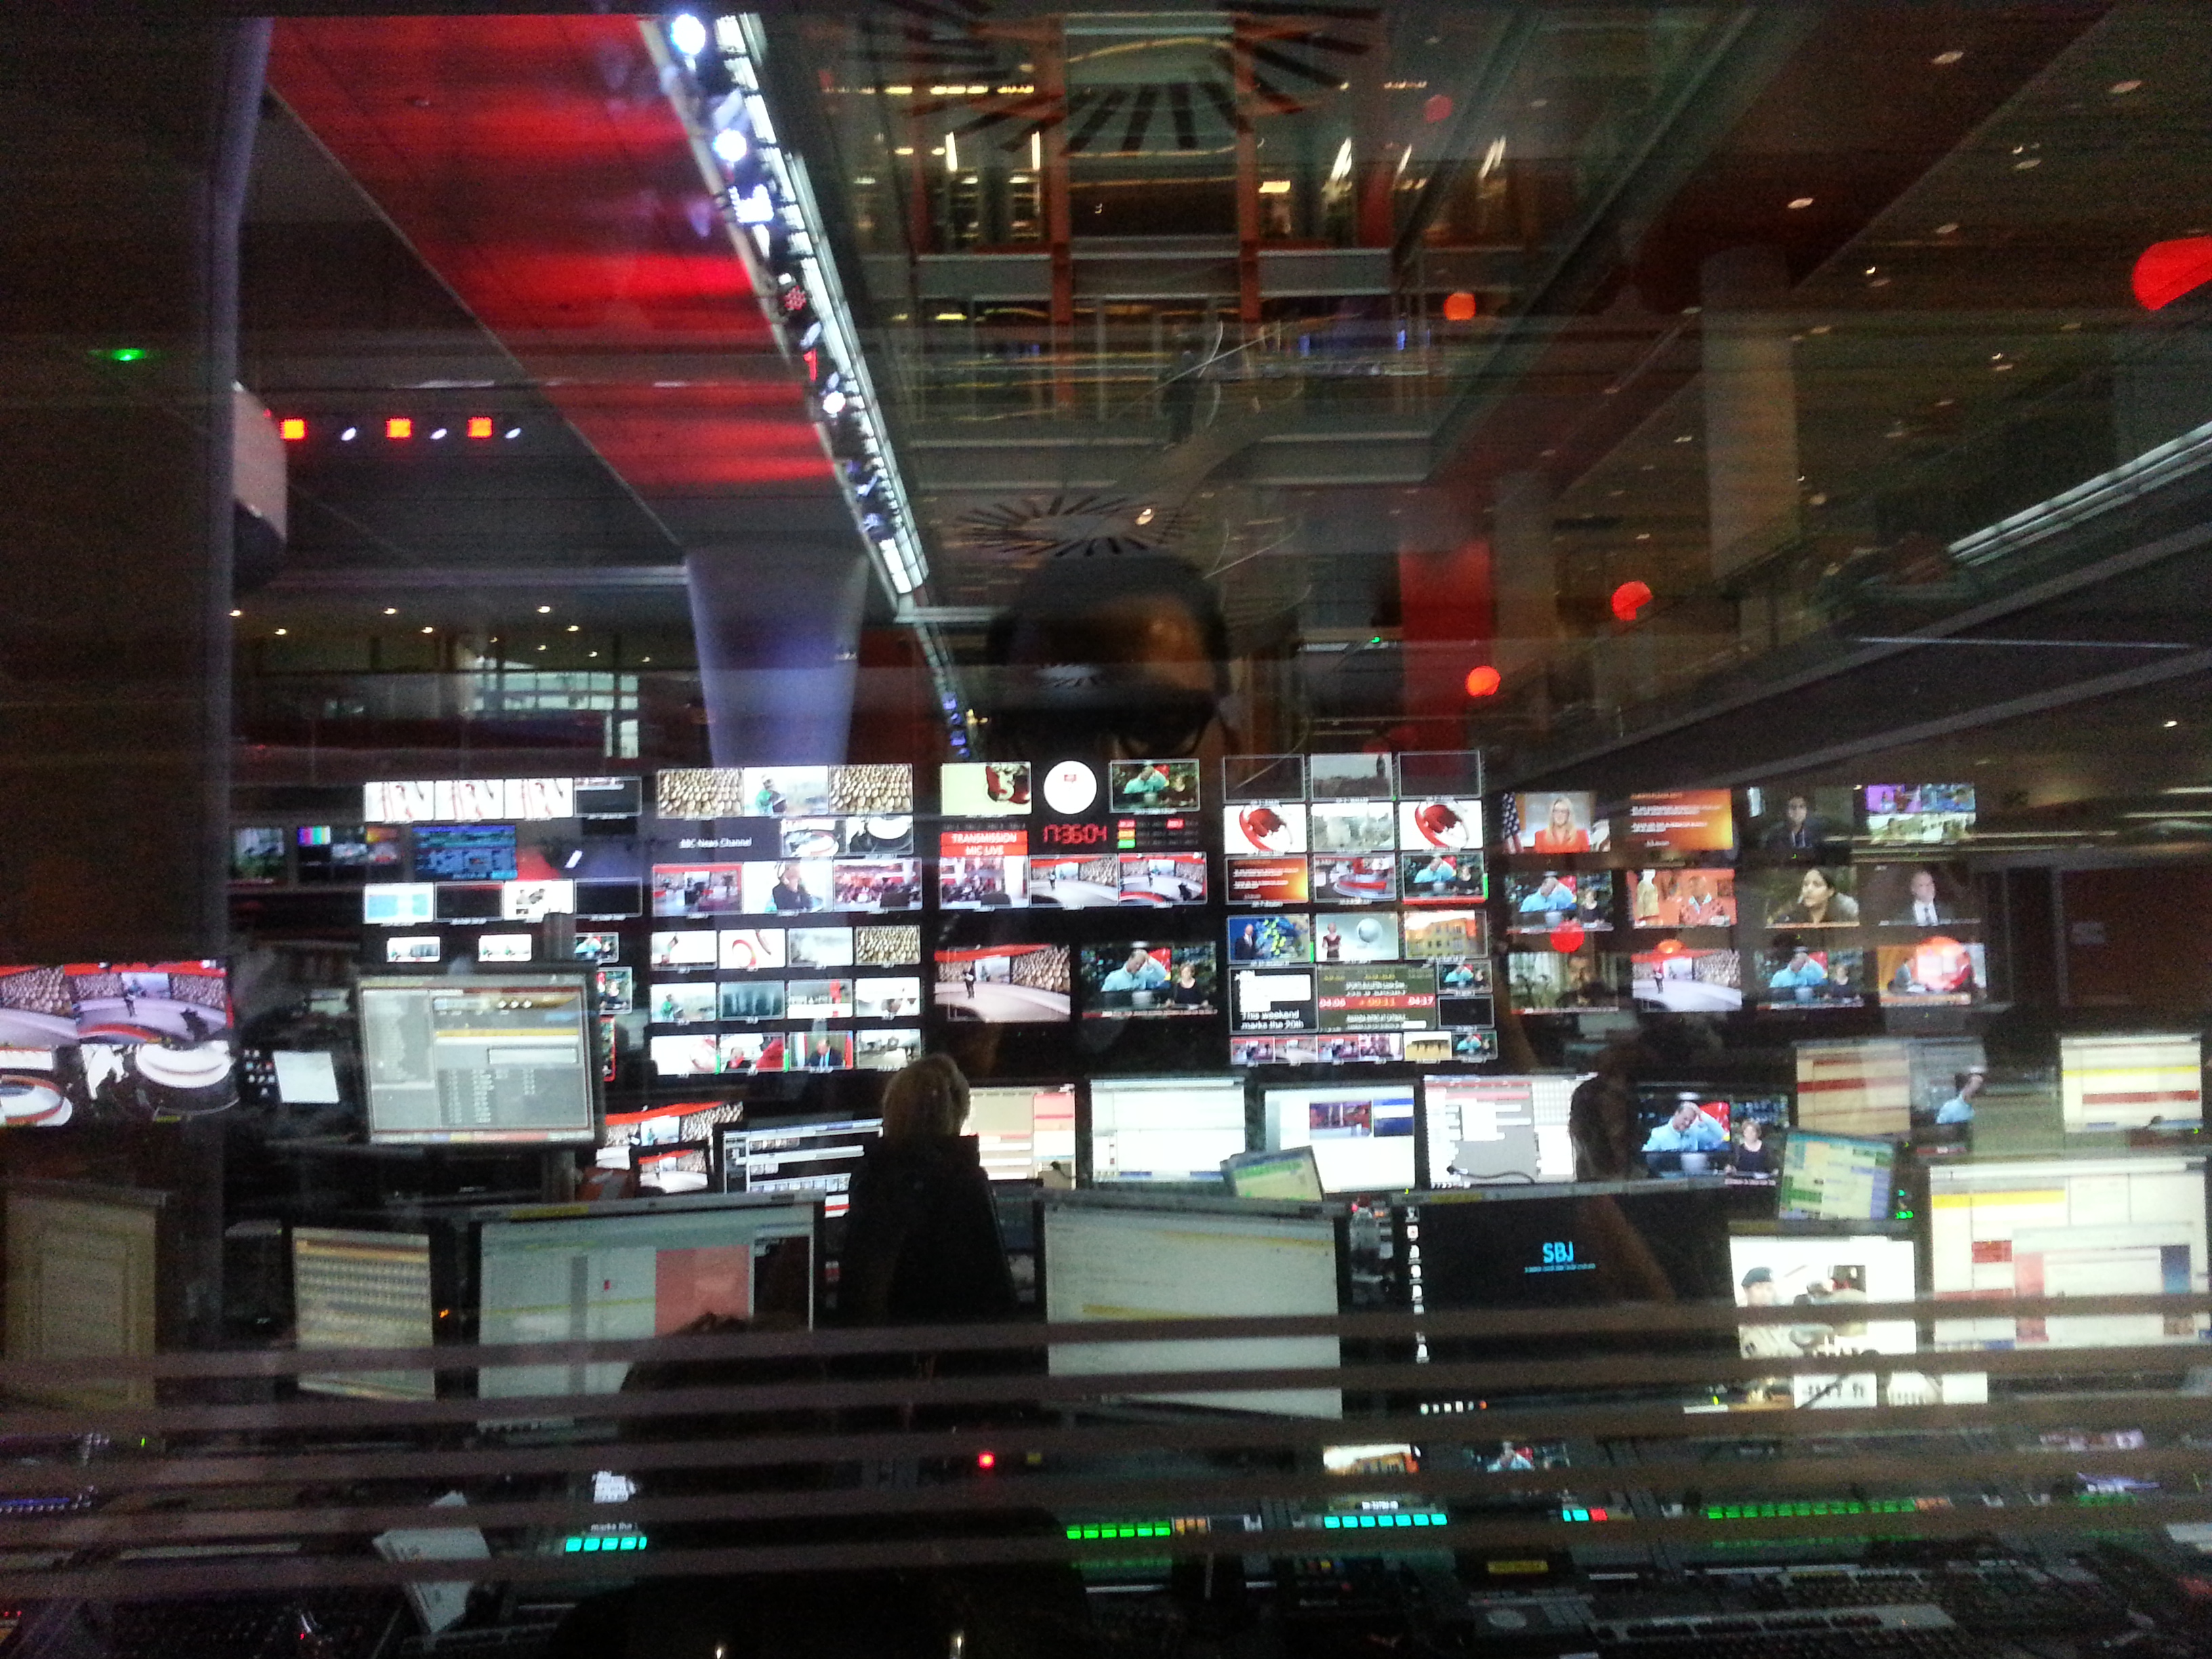 Visit to BBC News Broadcasting House in London